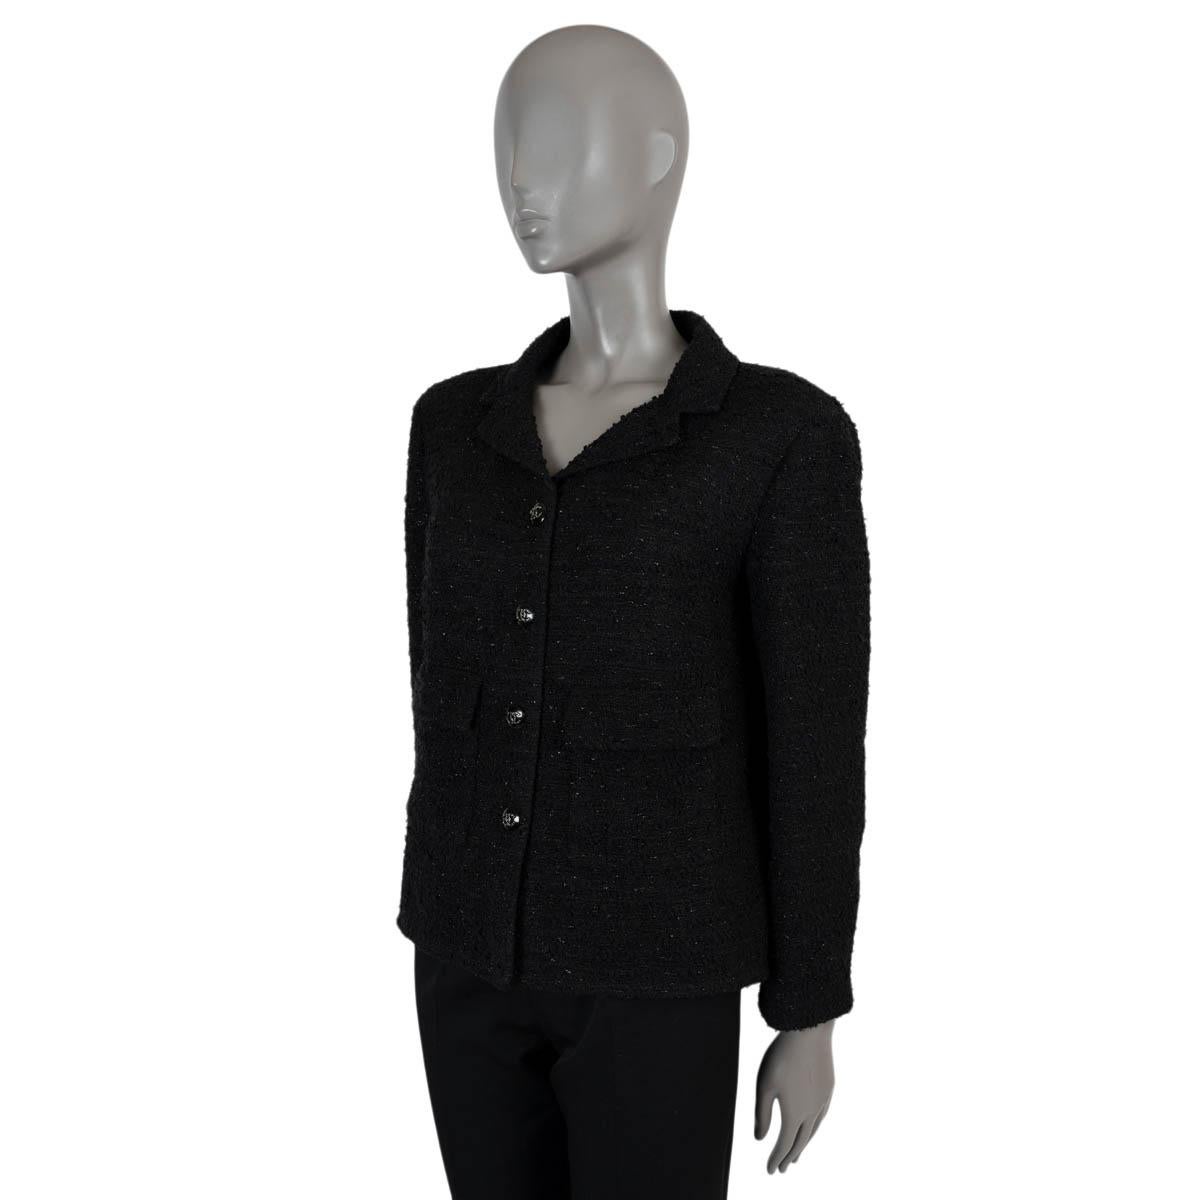 100% authentic Chanel lurex tweed jacket in black acrylic (52%), polyester (30%), viscose (9%) and polyamide (9%). Classic little black jacket with peak lapels and two flap pockets at the waist. Opens with rhinestone encrusted CC buttons on the